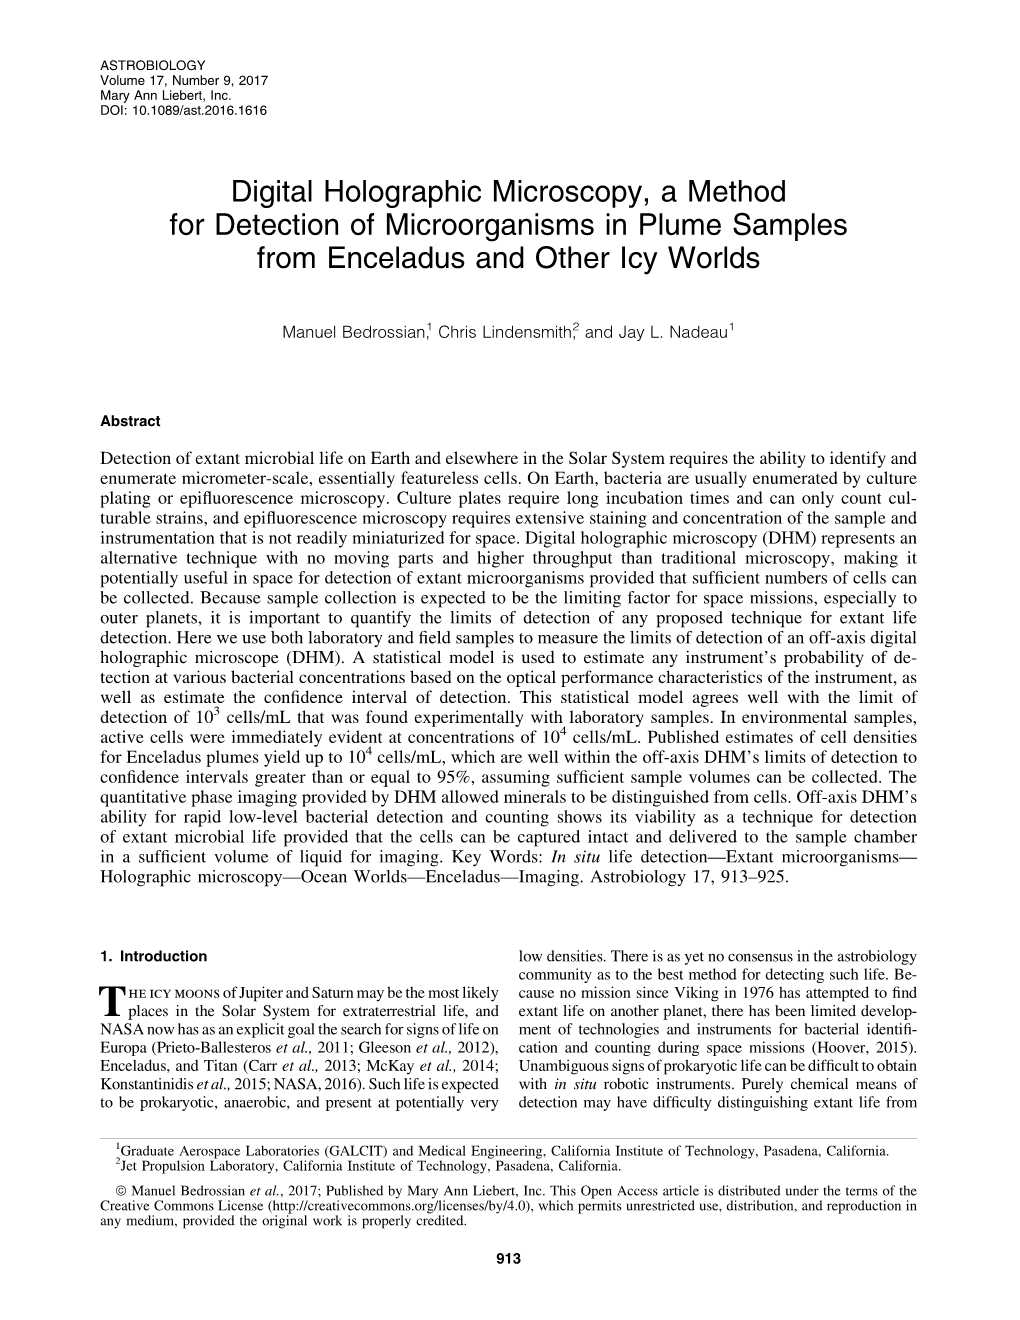 Digital Holographic Microscopy, a Method for Detection of Microorganisms in Plume Samples from Enceladus and Other Icy Worlds